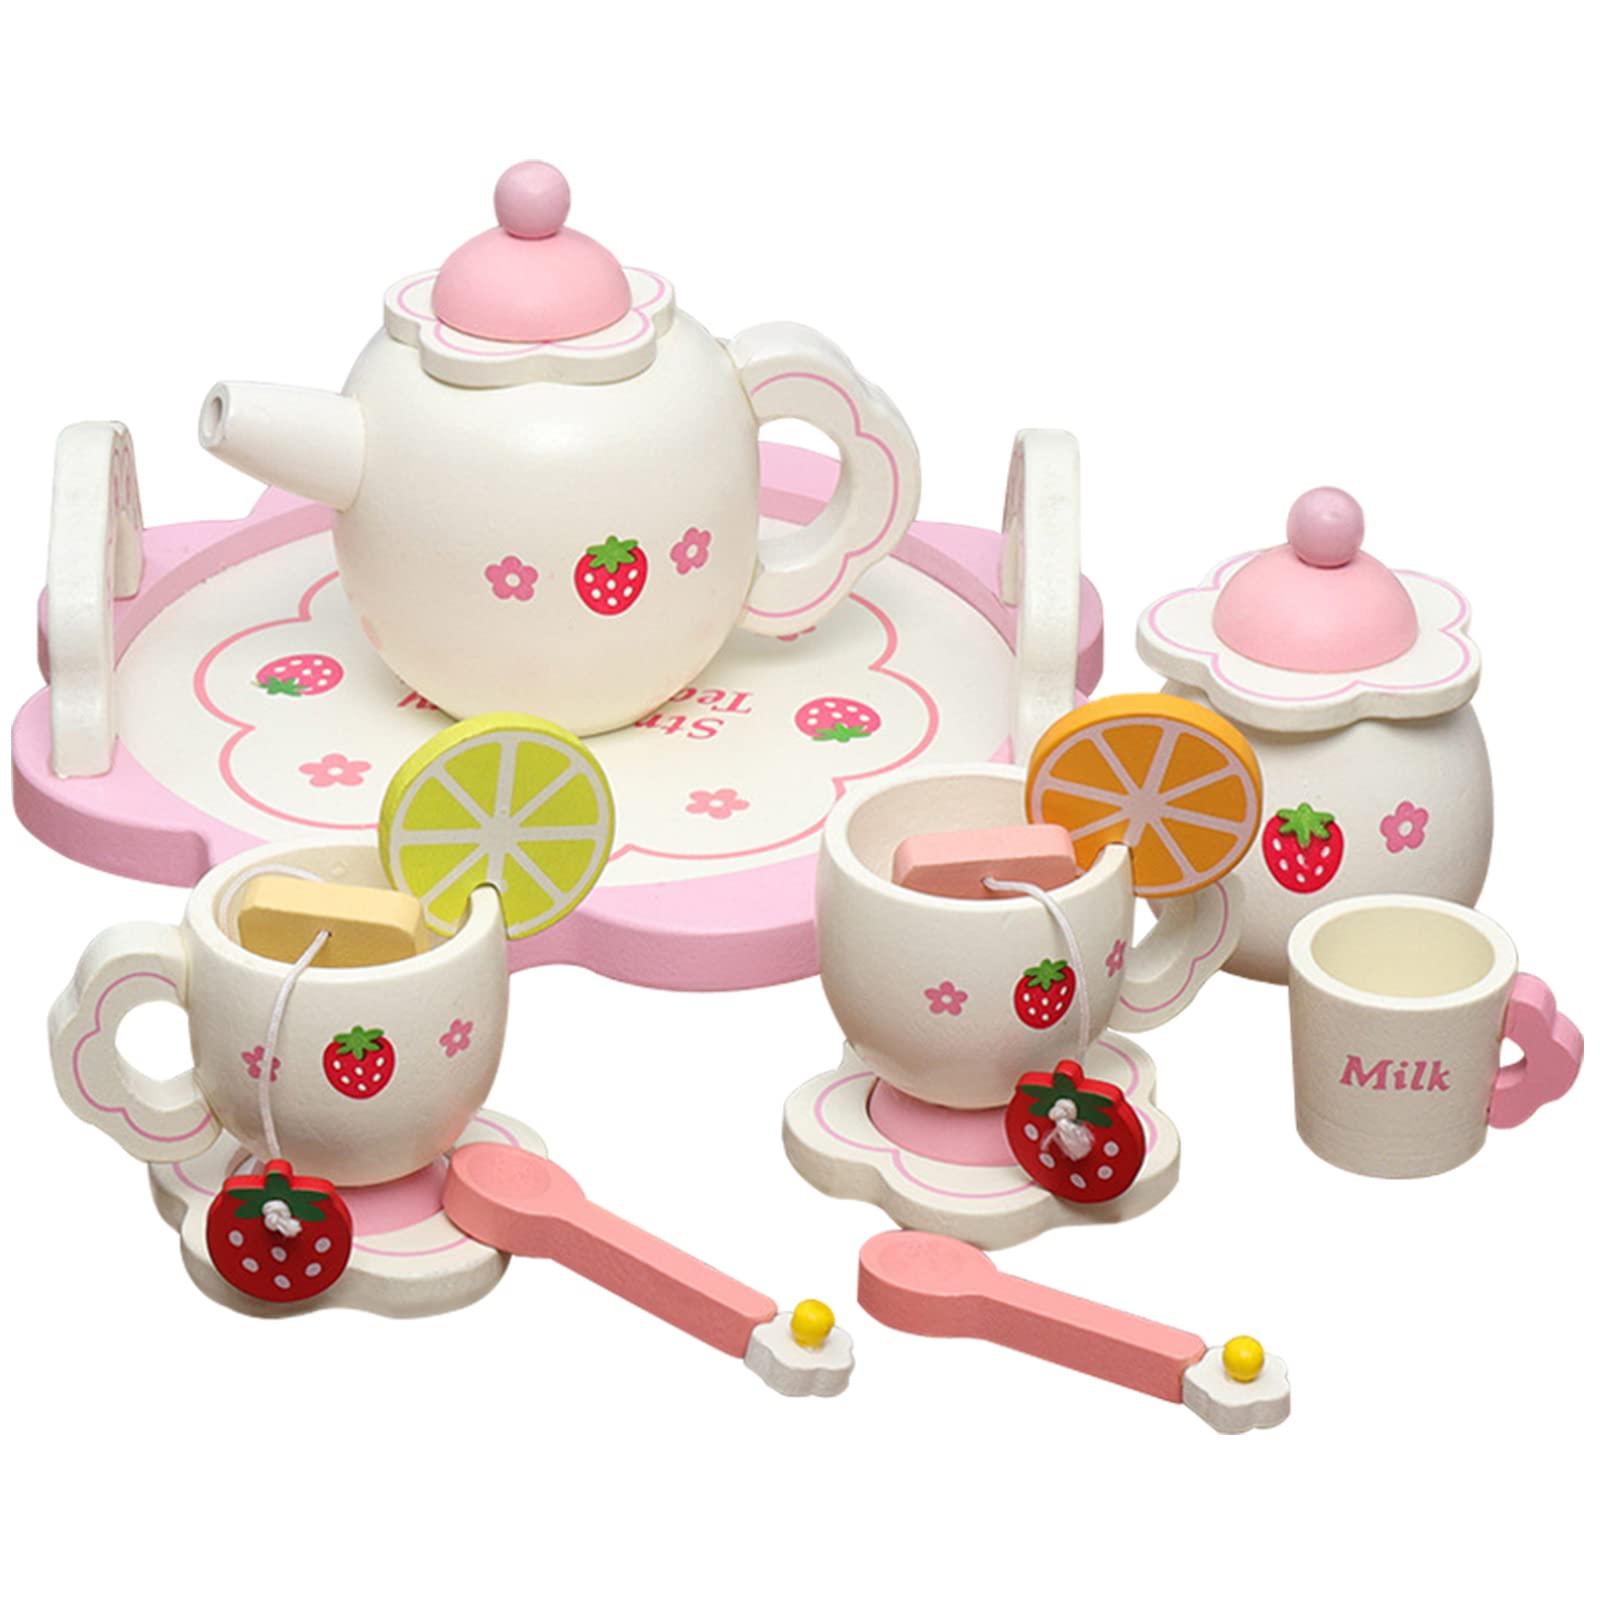 NAVK Wooden Tea Set Toys, Pretend Play Game Toy for Girls, 14 Pcs Cute Kids Wooden Kitchen Accessories, Birthday Christmas Easter Gift for Kids Boy